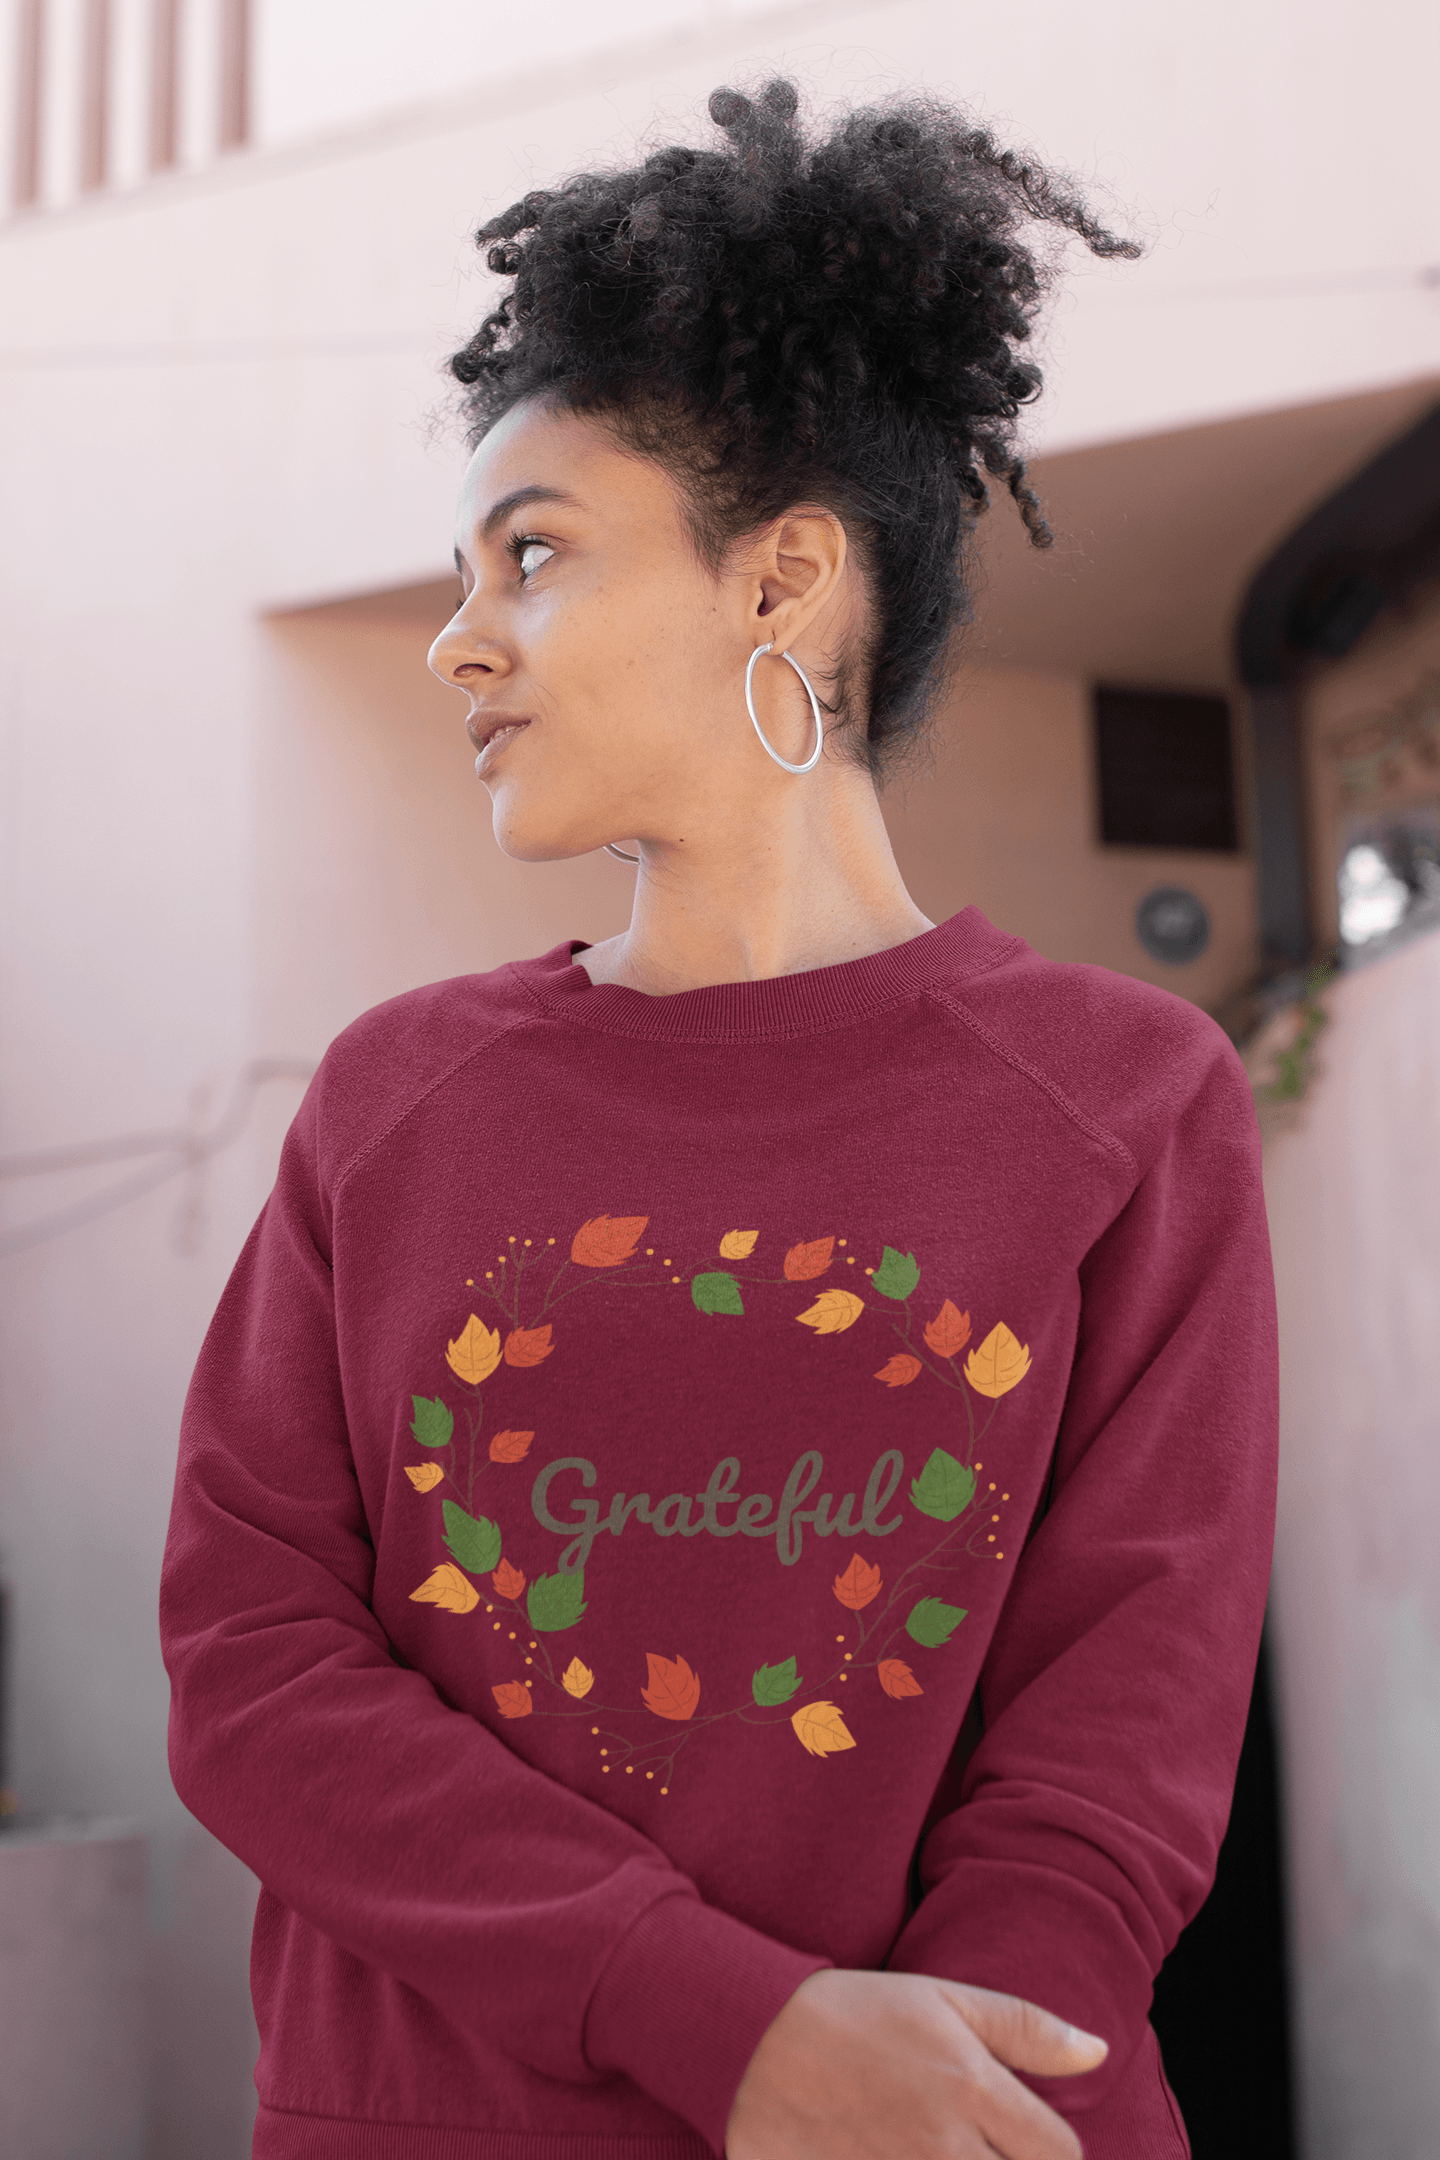 Grateful Sweatshirt - Sharp Tact Kreativ | Tees & Gifts with Encouraging Messages to Brighten Your Day with a Bit of Wit